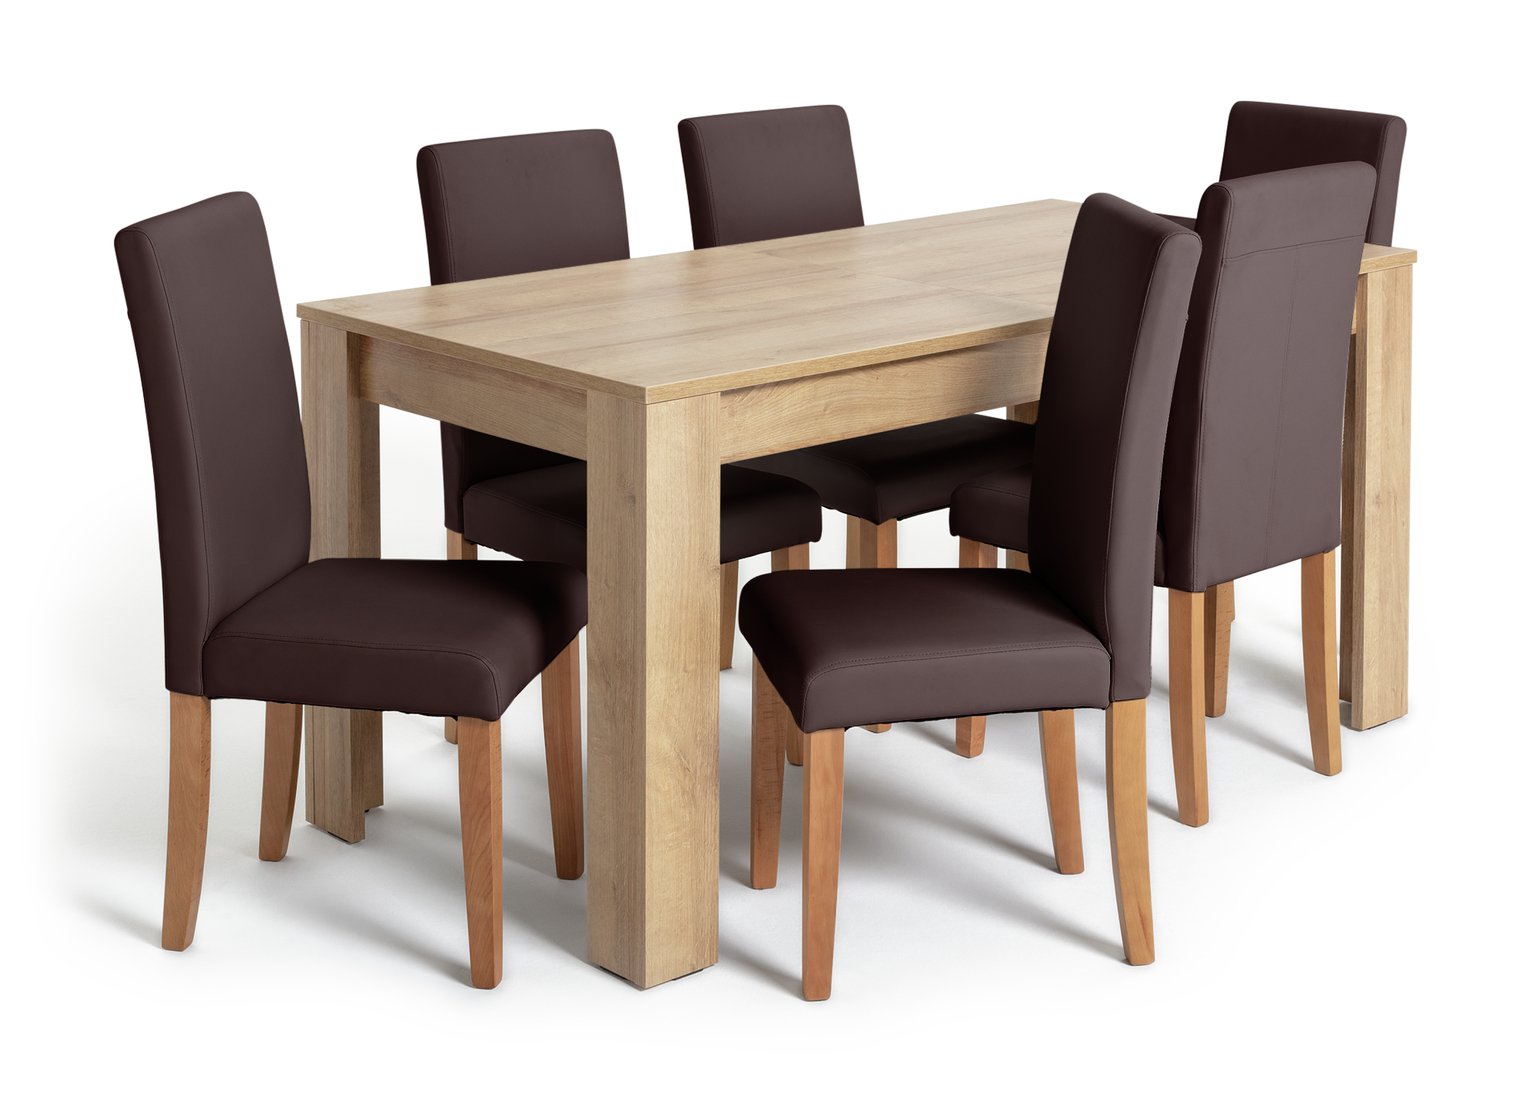 Argos Home Miami Extendable XL Dining Table & 6 Chairs -Choc Reviews